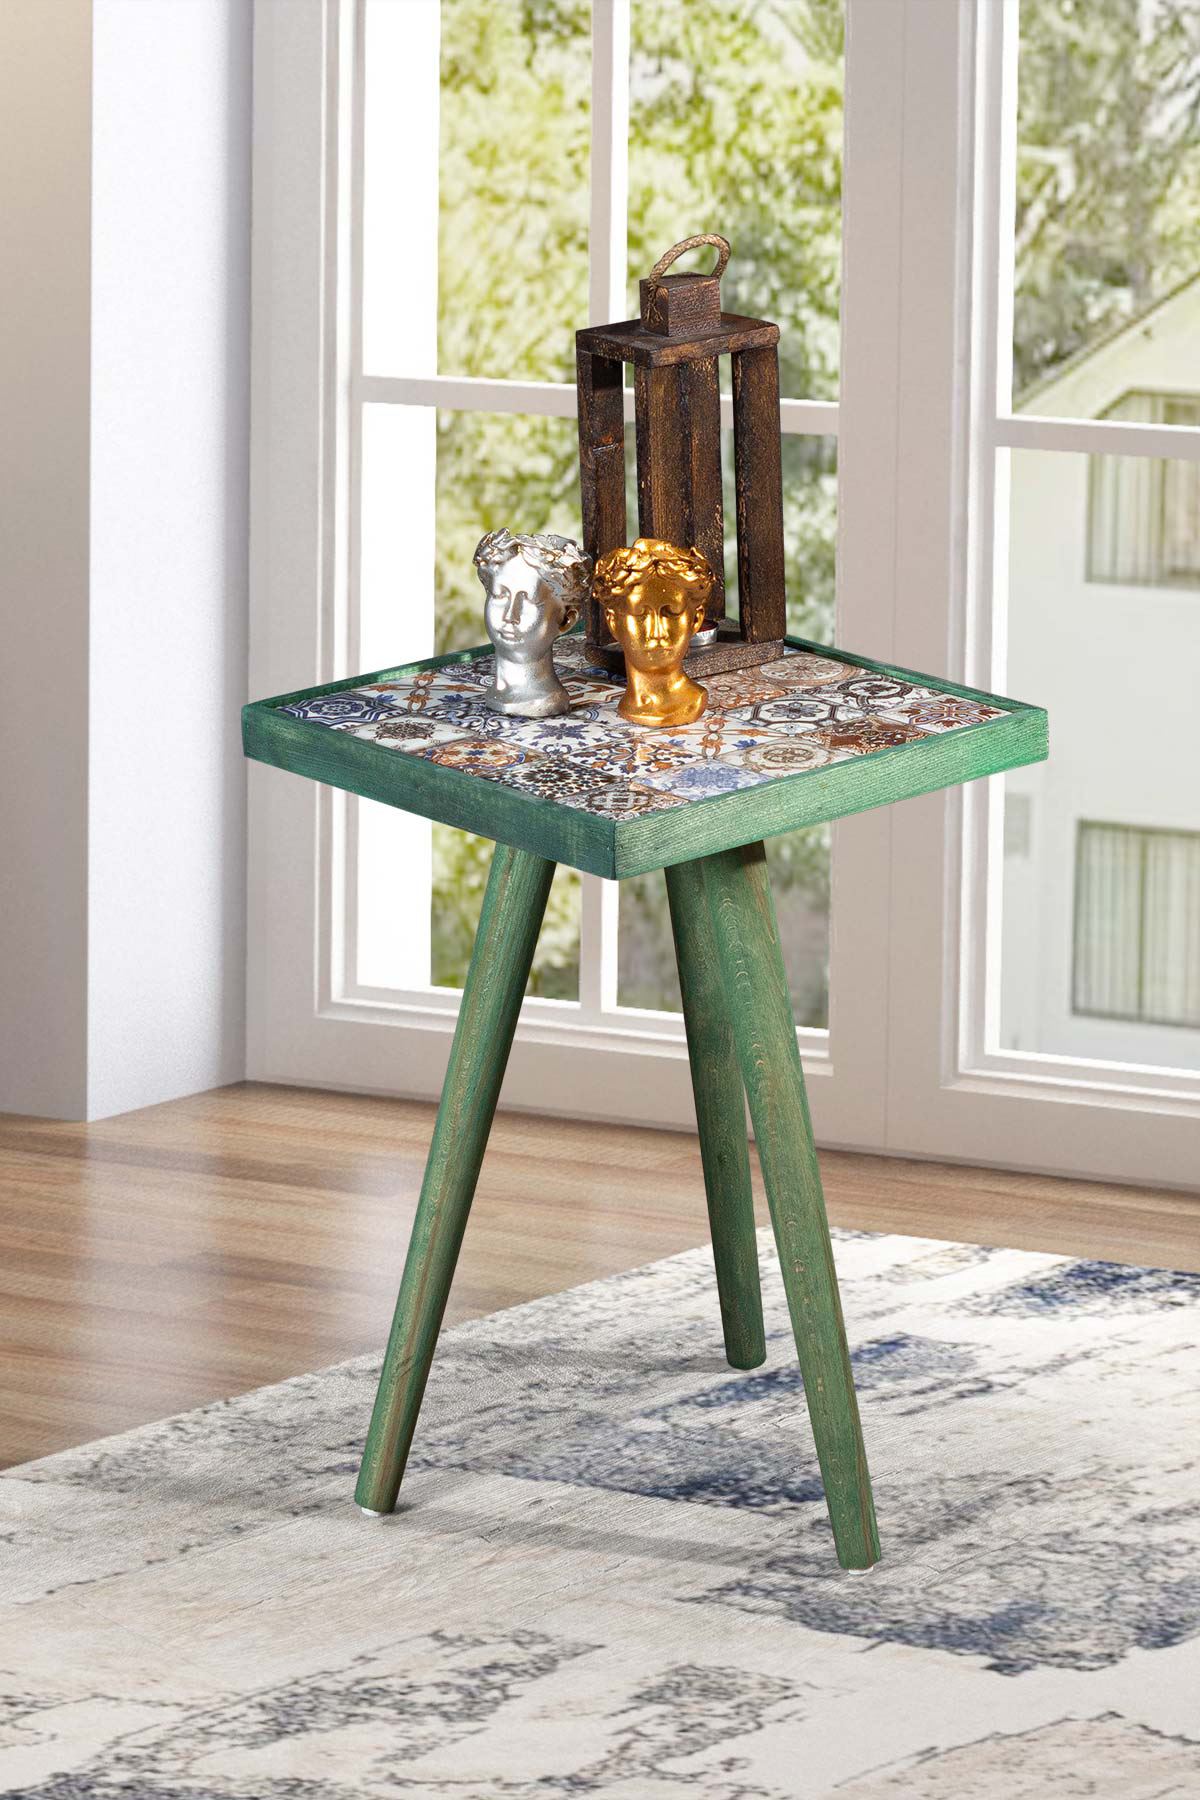 Bofigo Wooden Tile Center Table Wooden Solid Wood Table 32x32 Cm Green